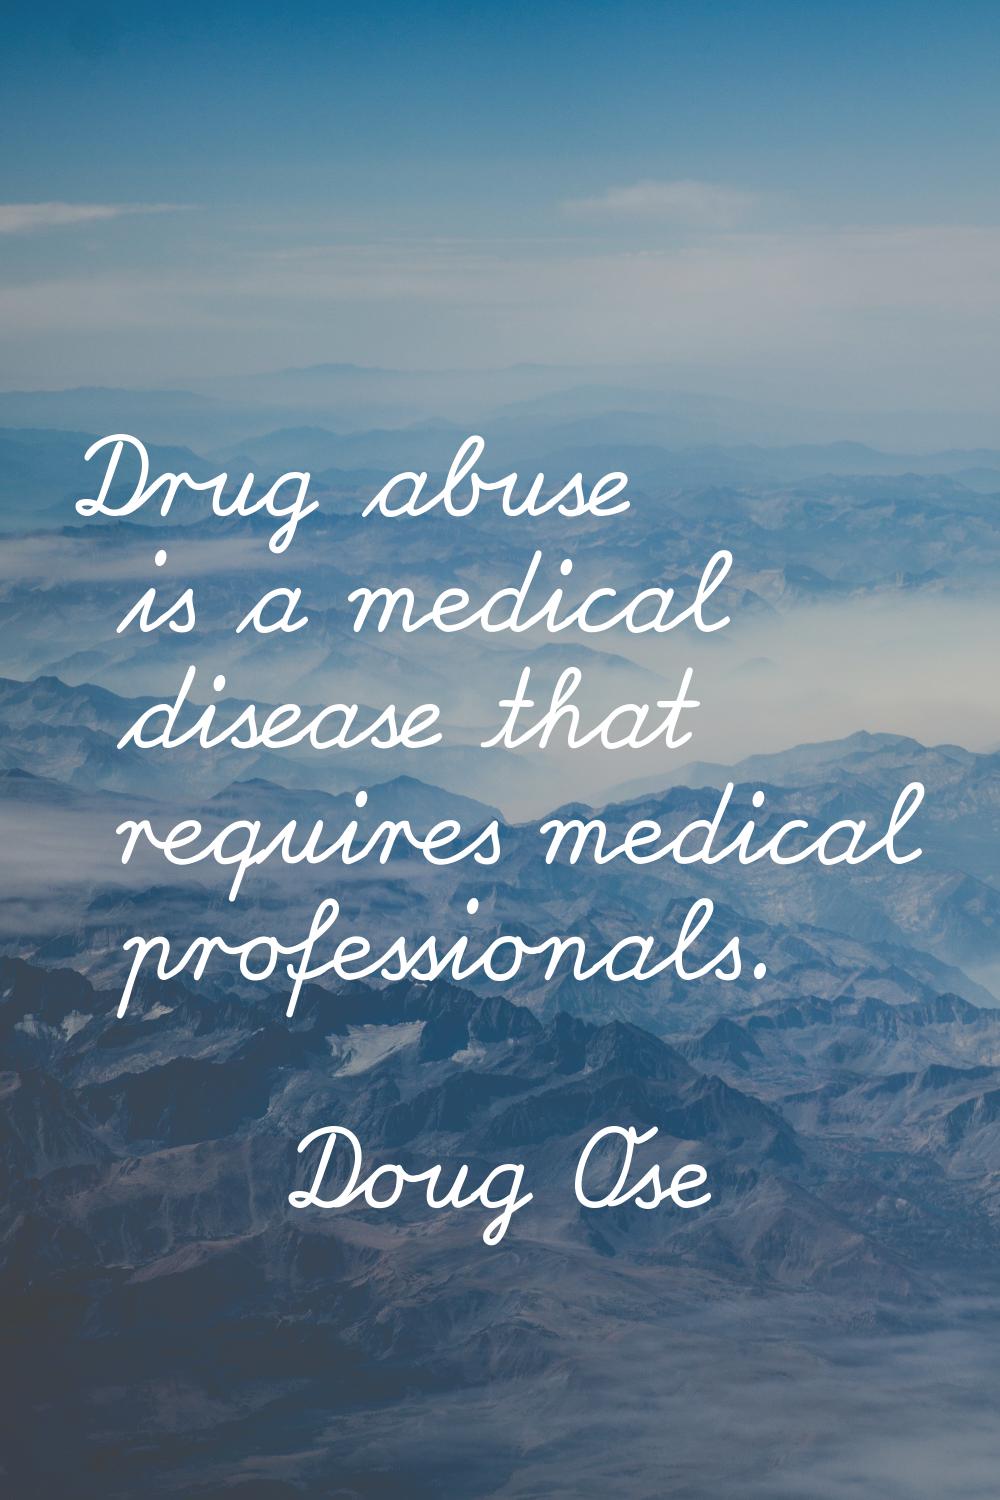 Drug abuse is a medical disease that requires medical professionals.